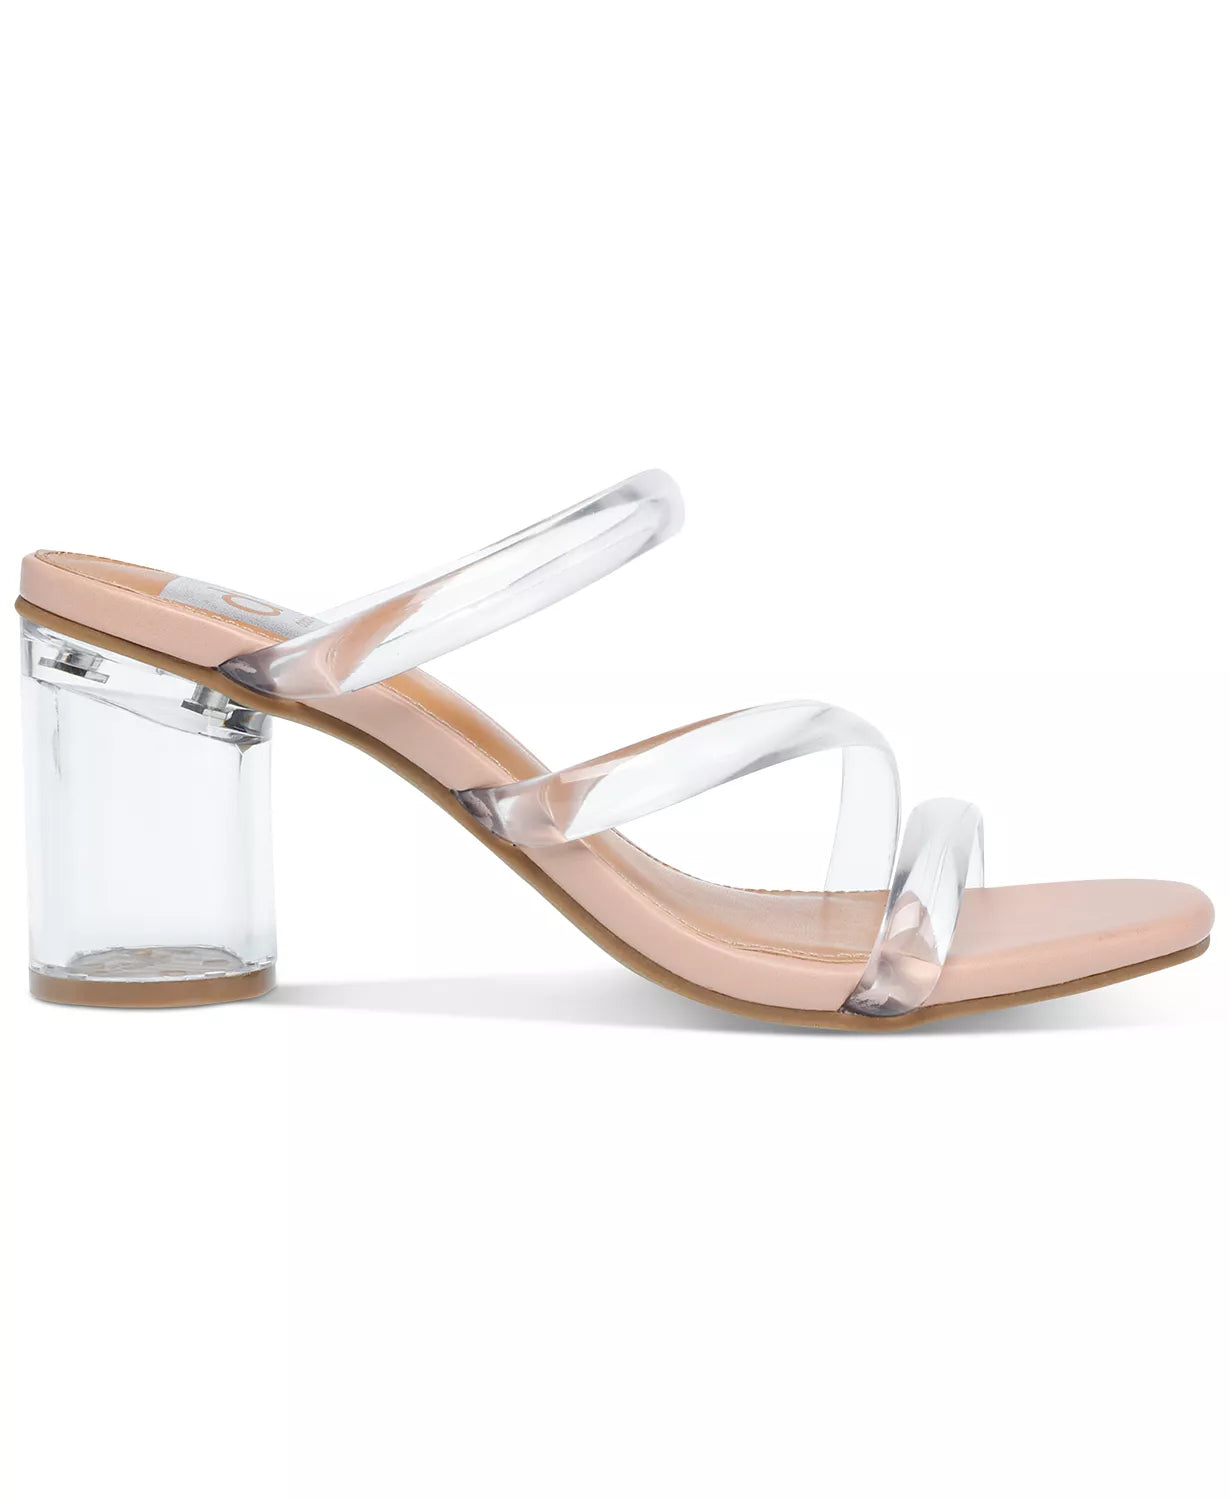 A mix of slender straps and a bold block heel come together for a sleek, modern look with these Myla sandals from DV Dolce Vita.  2-3/4" block heel Square-toe slip-on sandals Manmade upper; unlined; manmade sole Imported